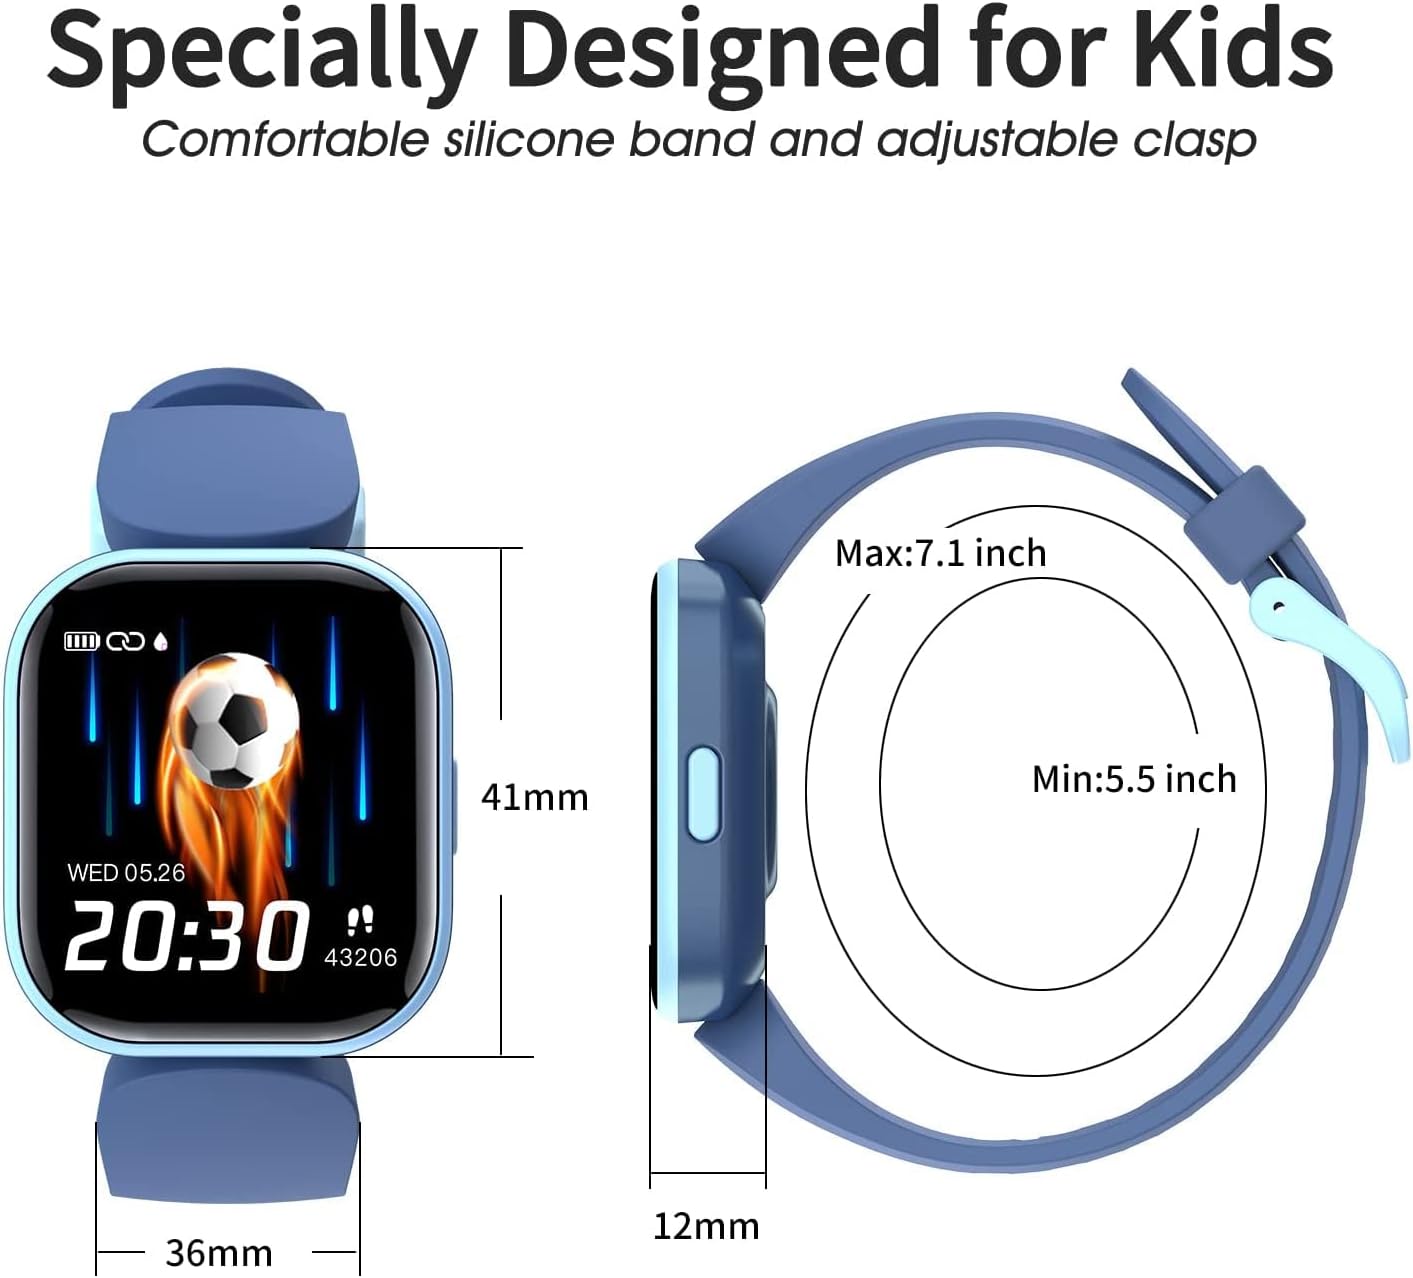 Kids Fitness Activity Tracker Watch, yunwon 1.4" DIY Watch Face IP68 Waterproof Kids Smart Watch with 19 Sport Modes, Pedometers, Heart Rate, Sleep Monitor, Great Gift for Boys Girls Teens 6+ (Blue)